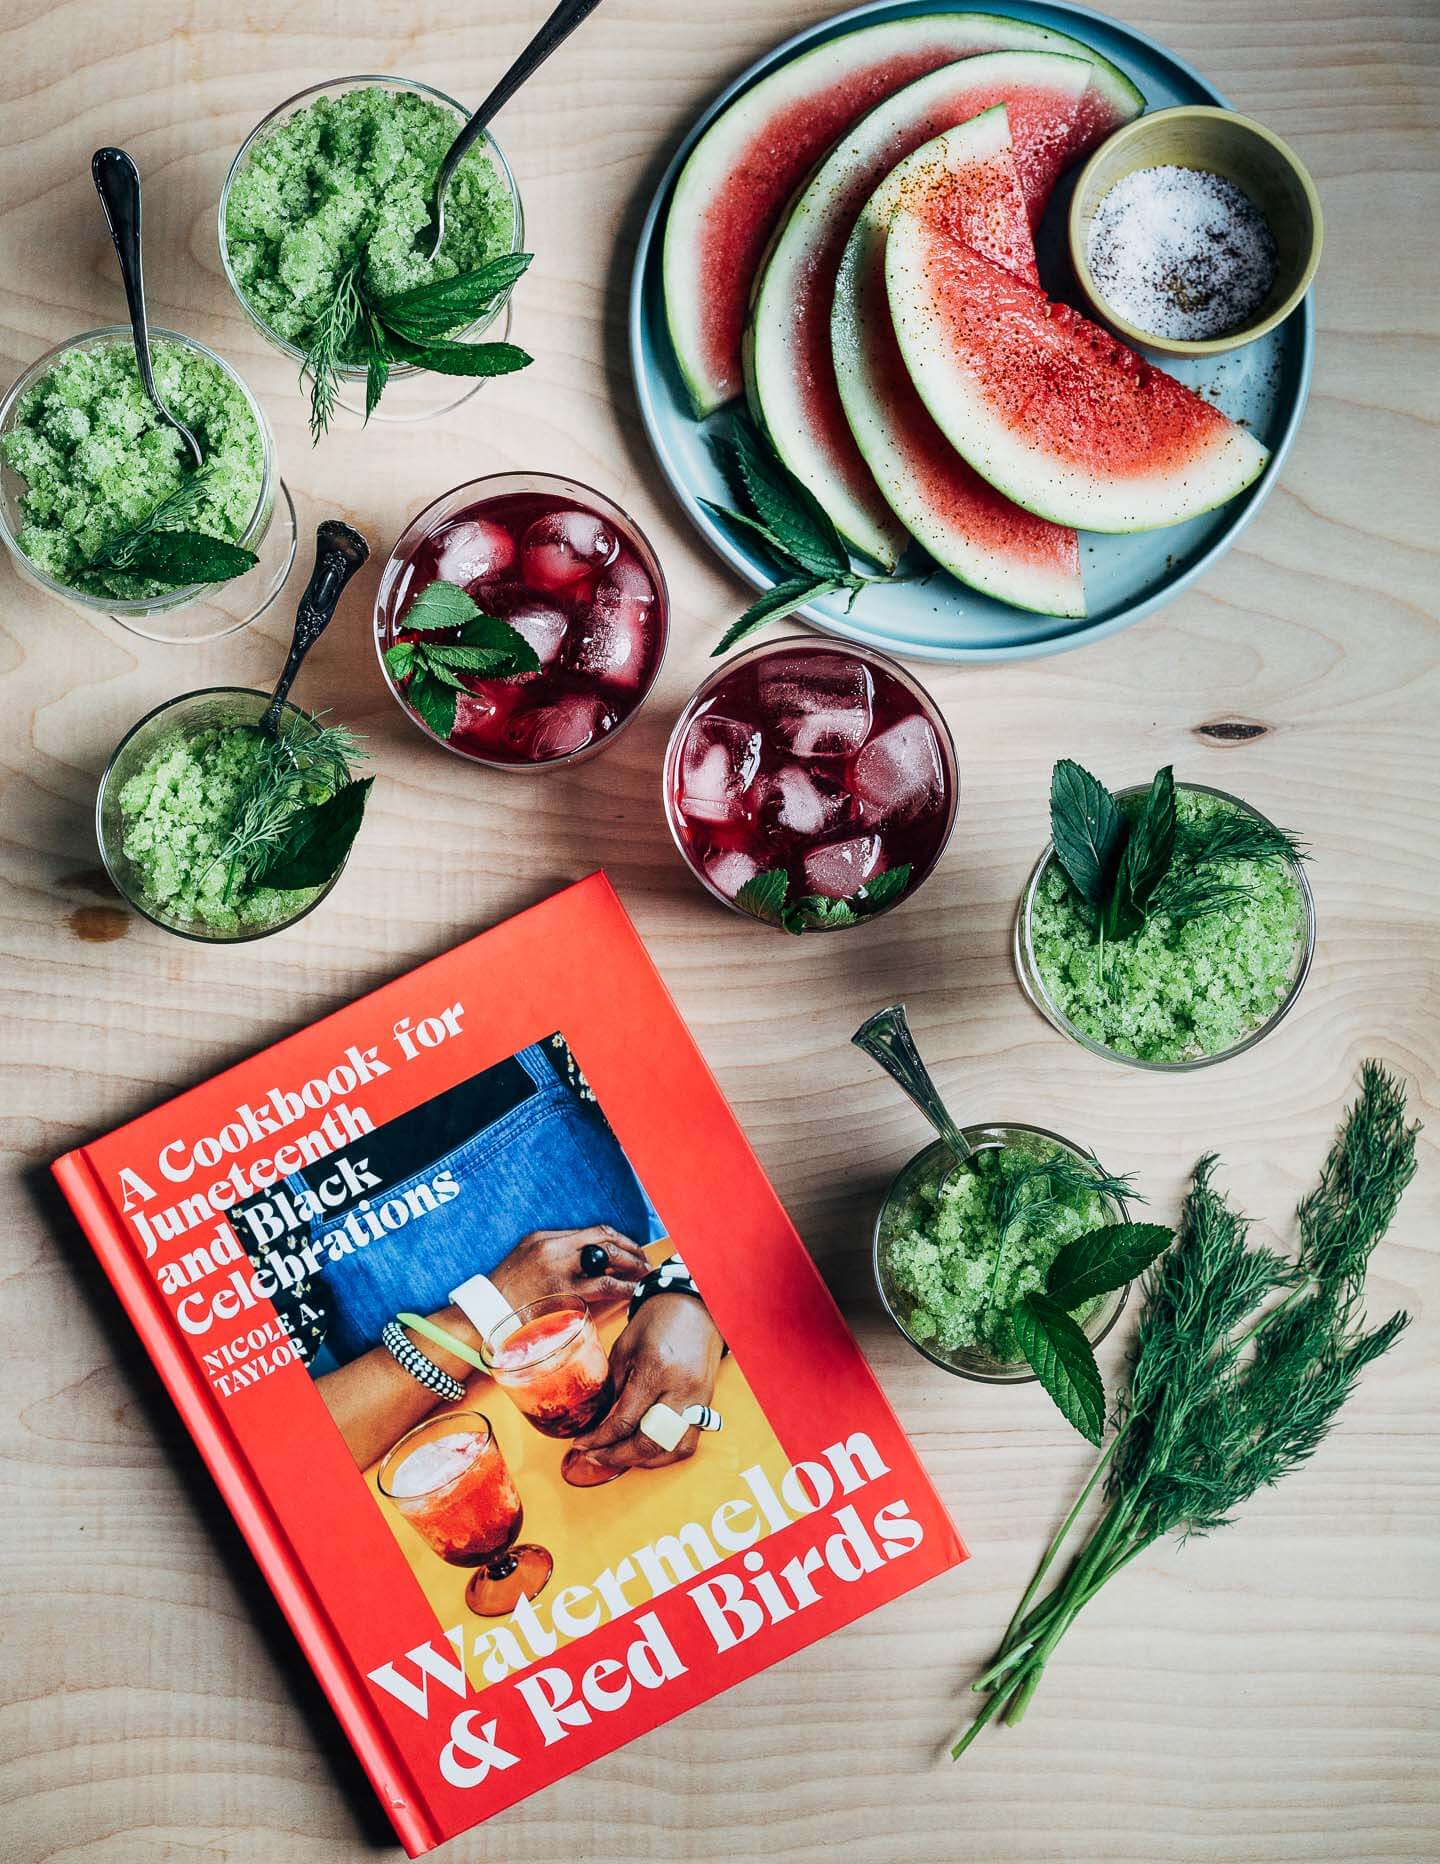 The cookbook Watermelons and Red Birds alongside glass of hibiscus tea, cucumber granita, and sliced watermelon.